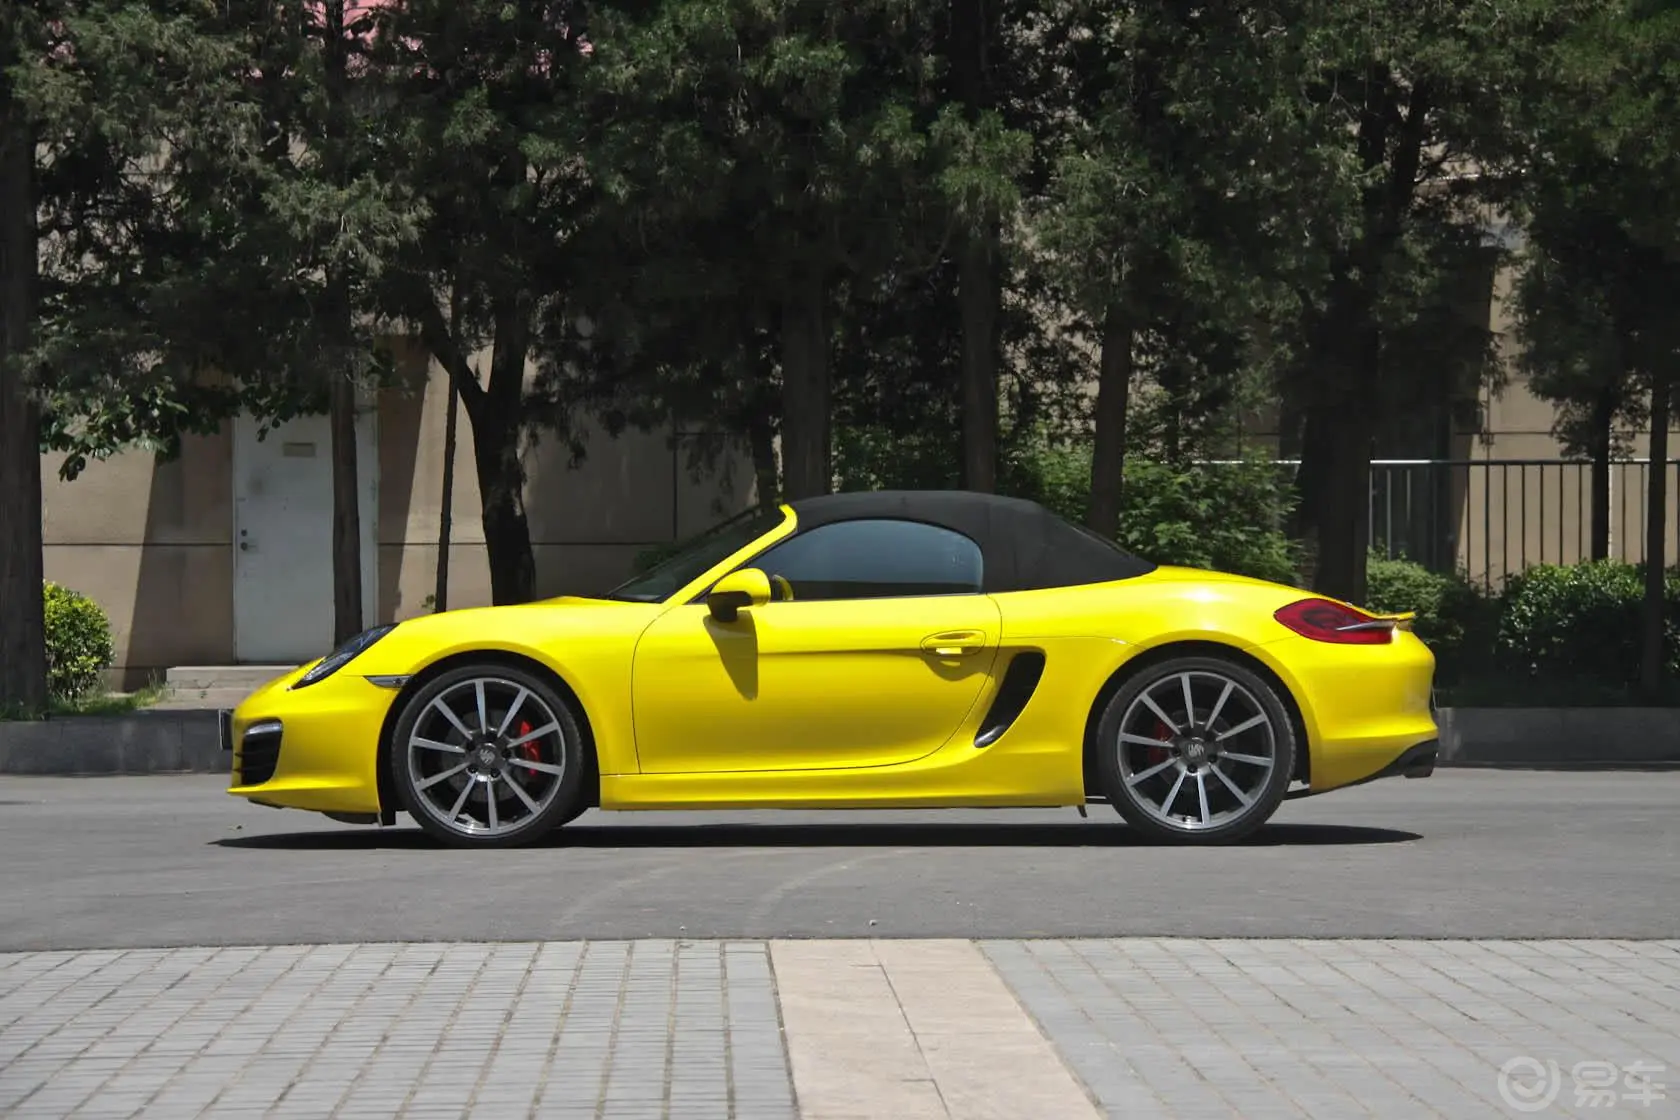 BoxsterBoxster S 3.4外观